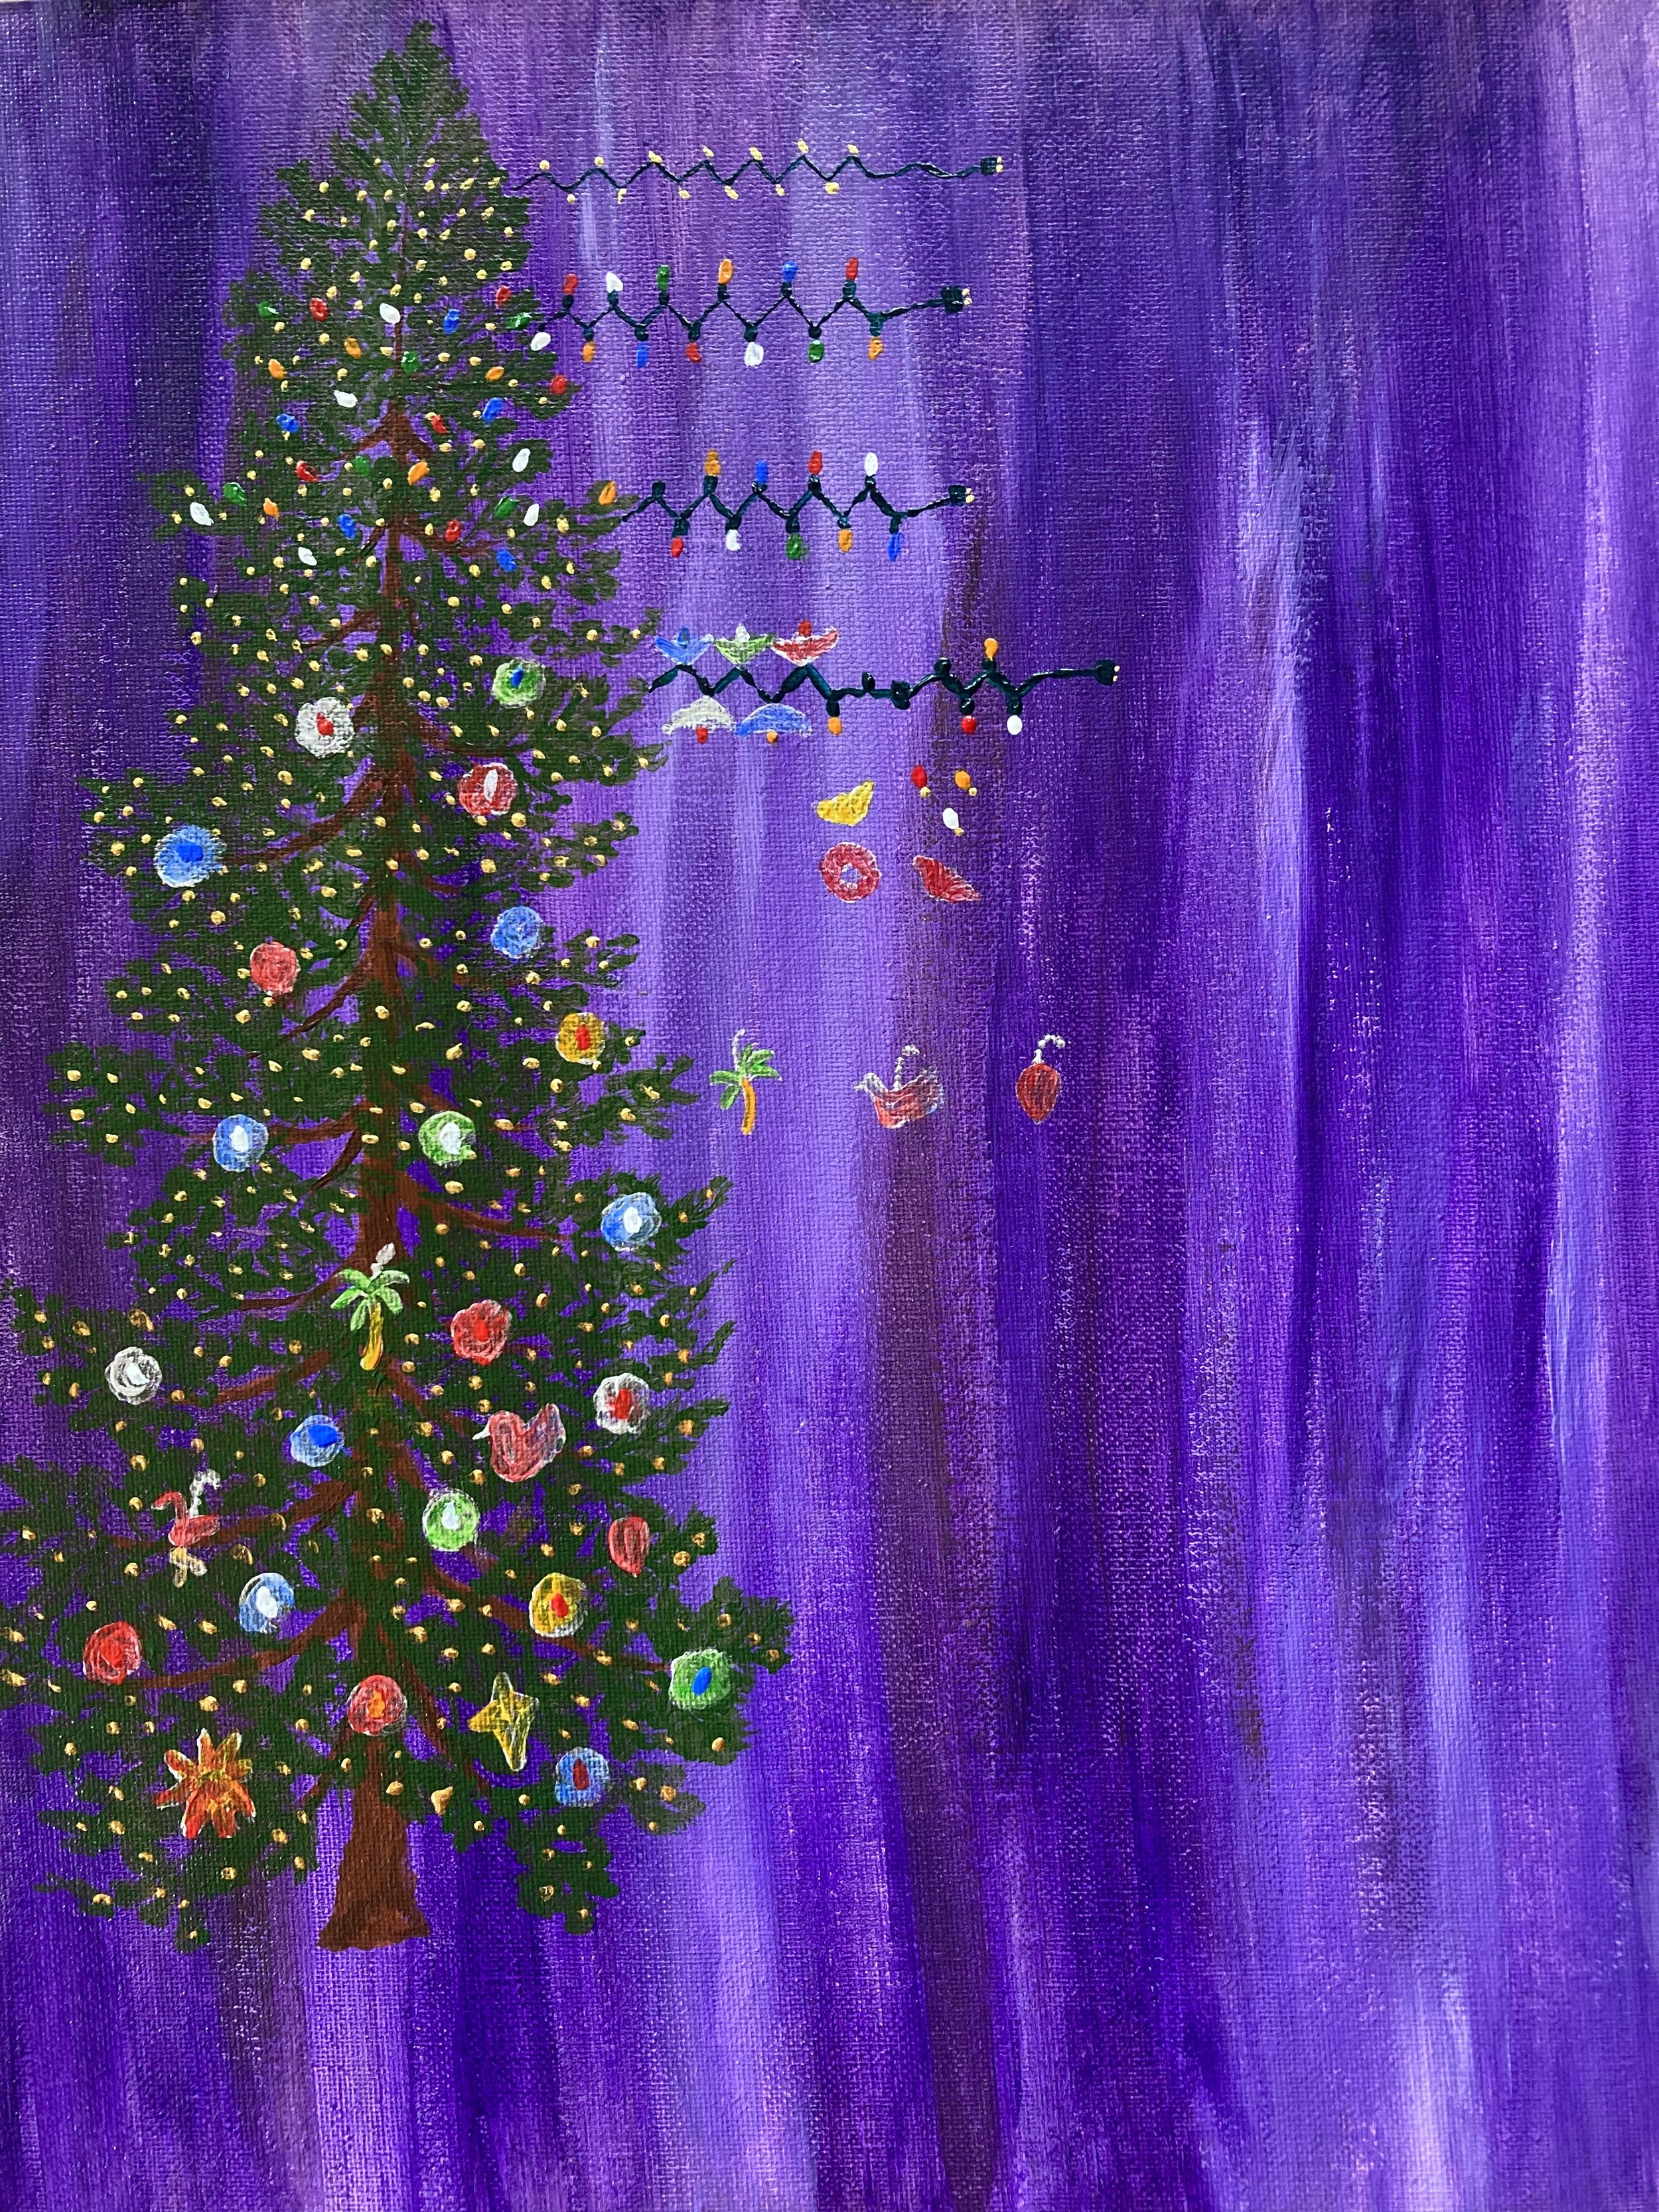  Painting of a decorated Christmas tree on a purple background, with strands of lights and groups of ornaments representing the timeline of decoration. 